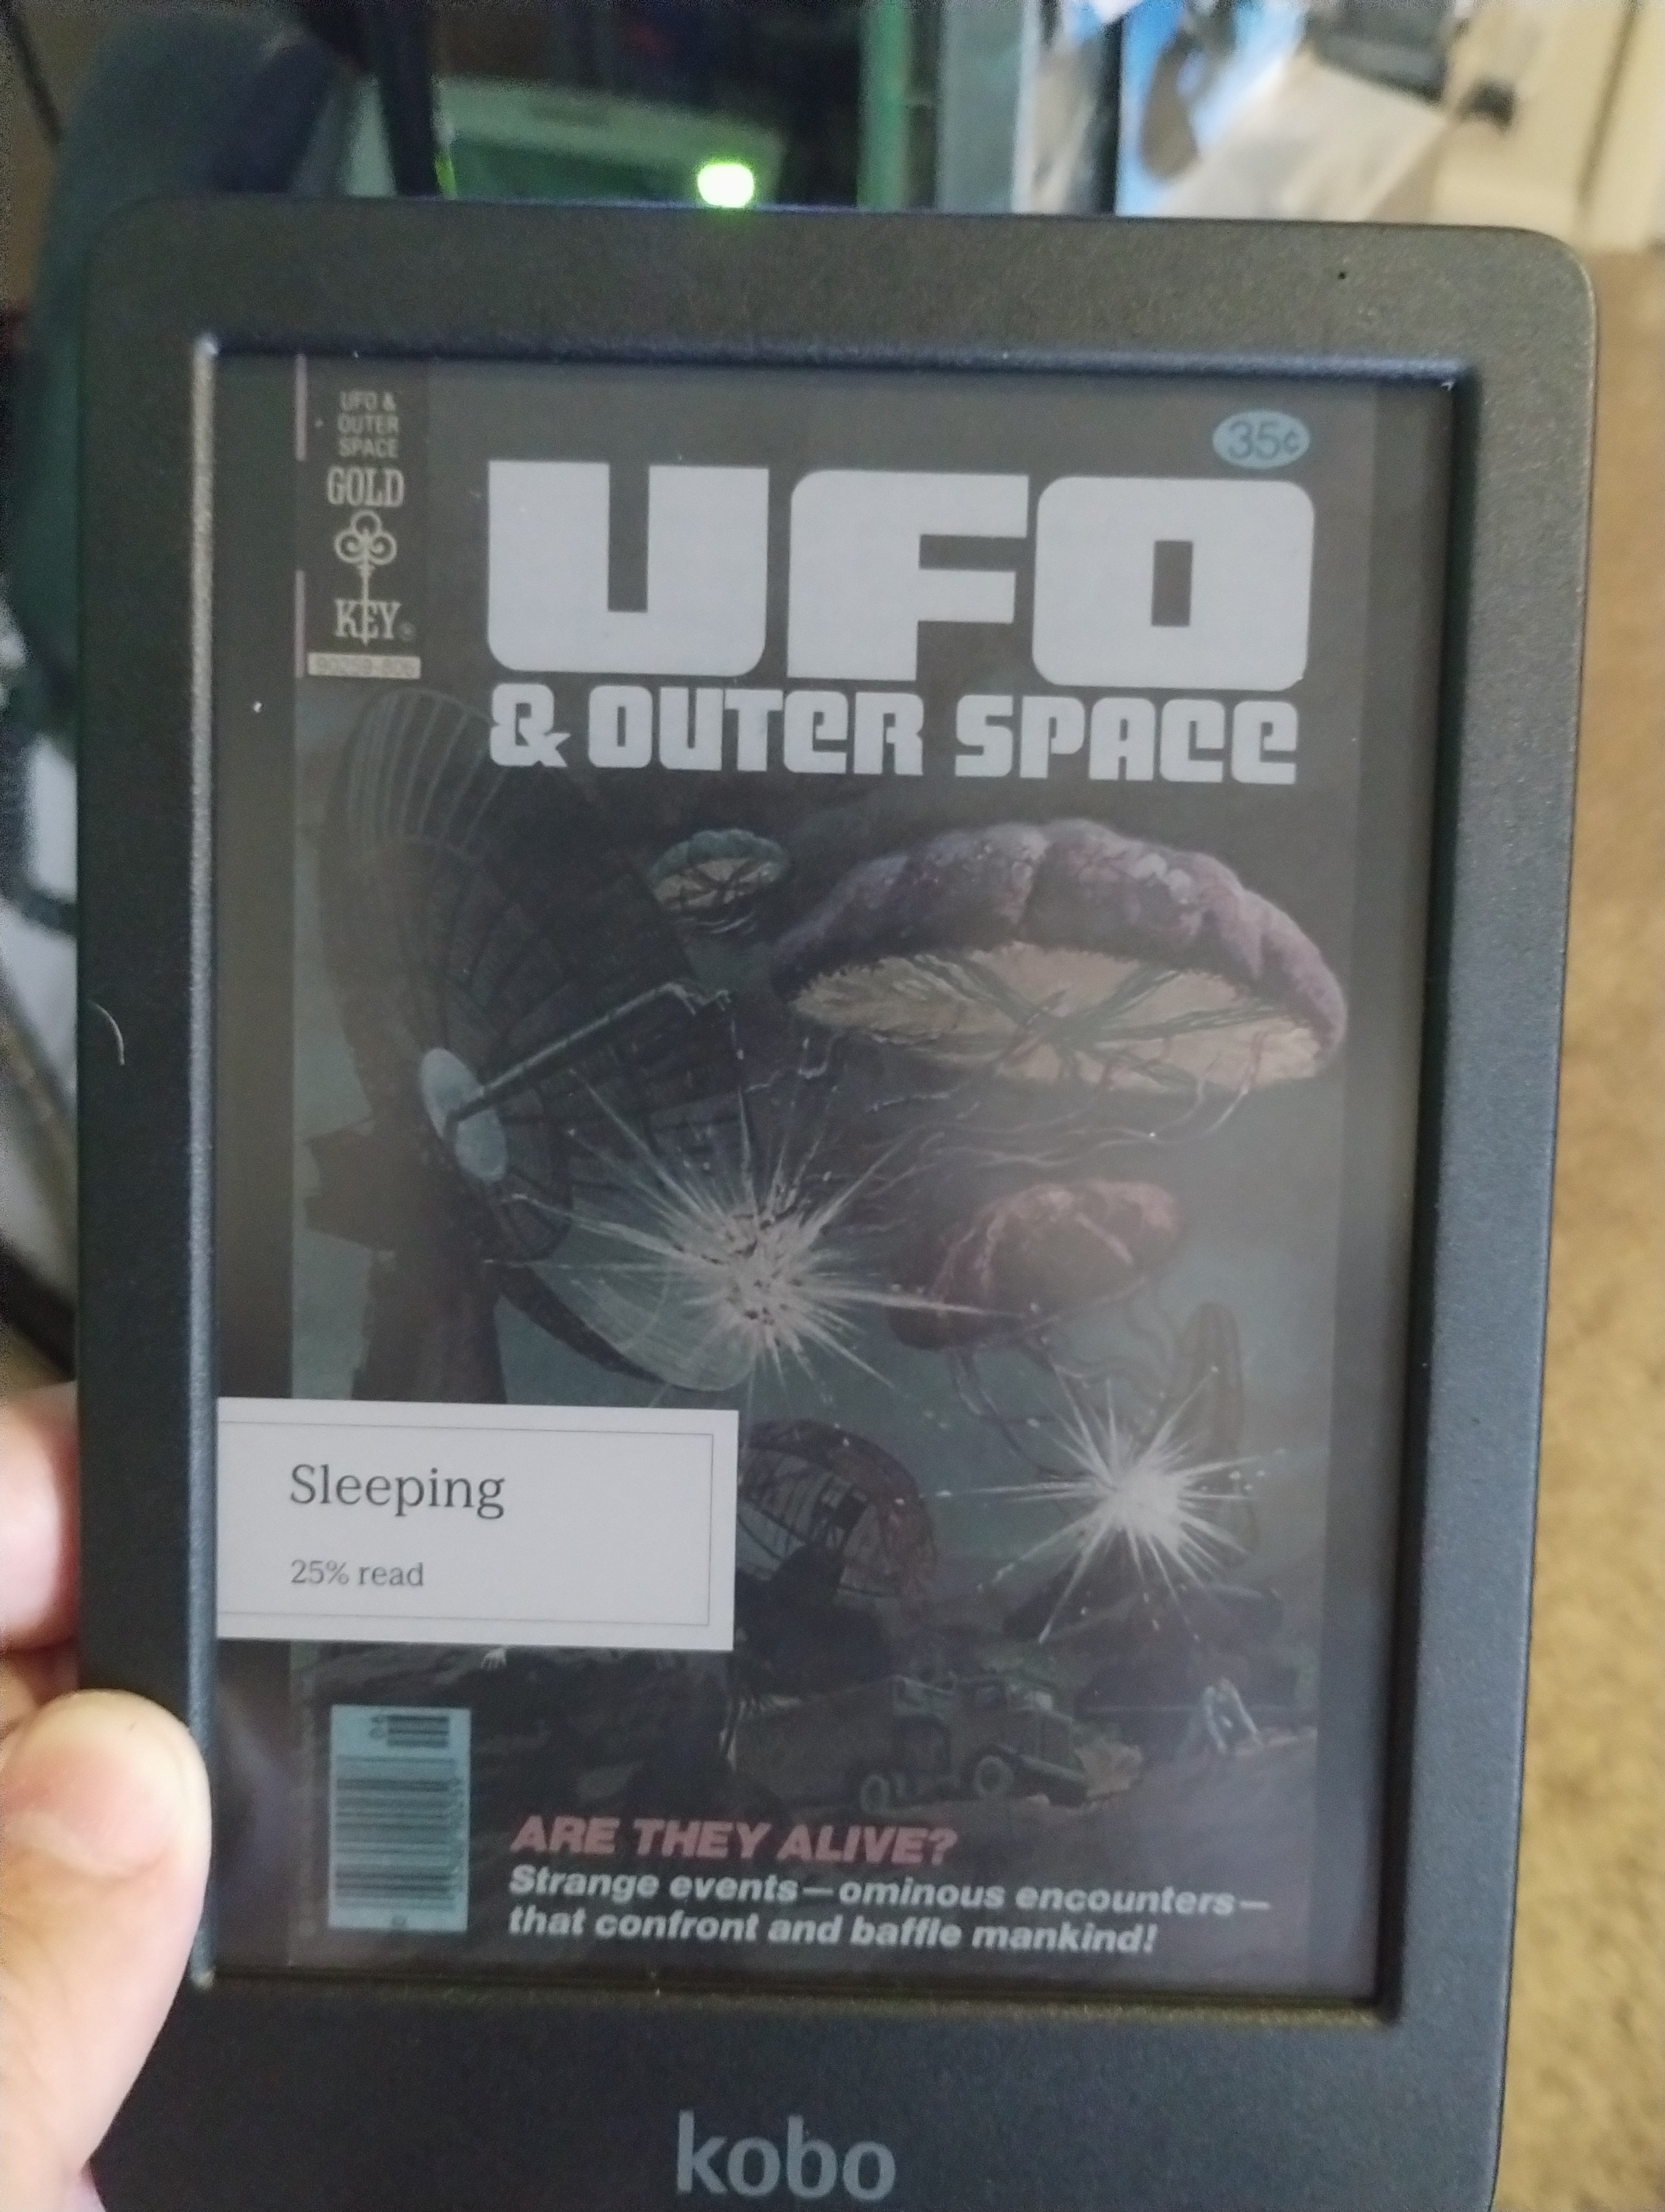 Kobo Clara Colour with a Gold Key UFO & Outer Space Comic book cover being displayed while the device is sleeping.